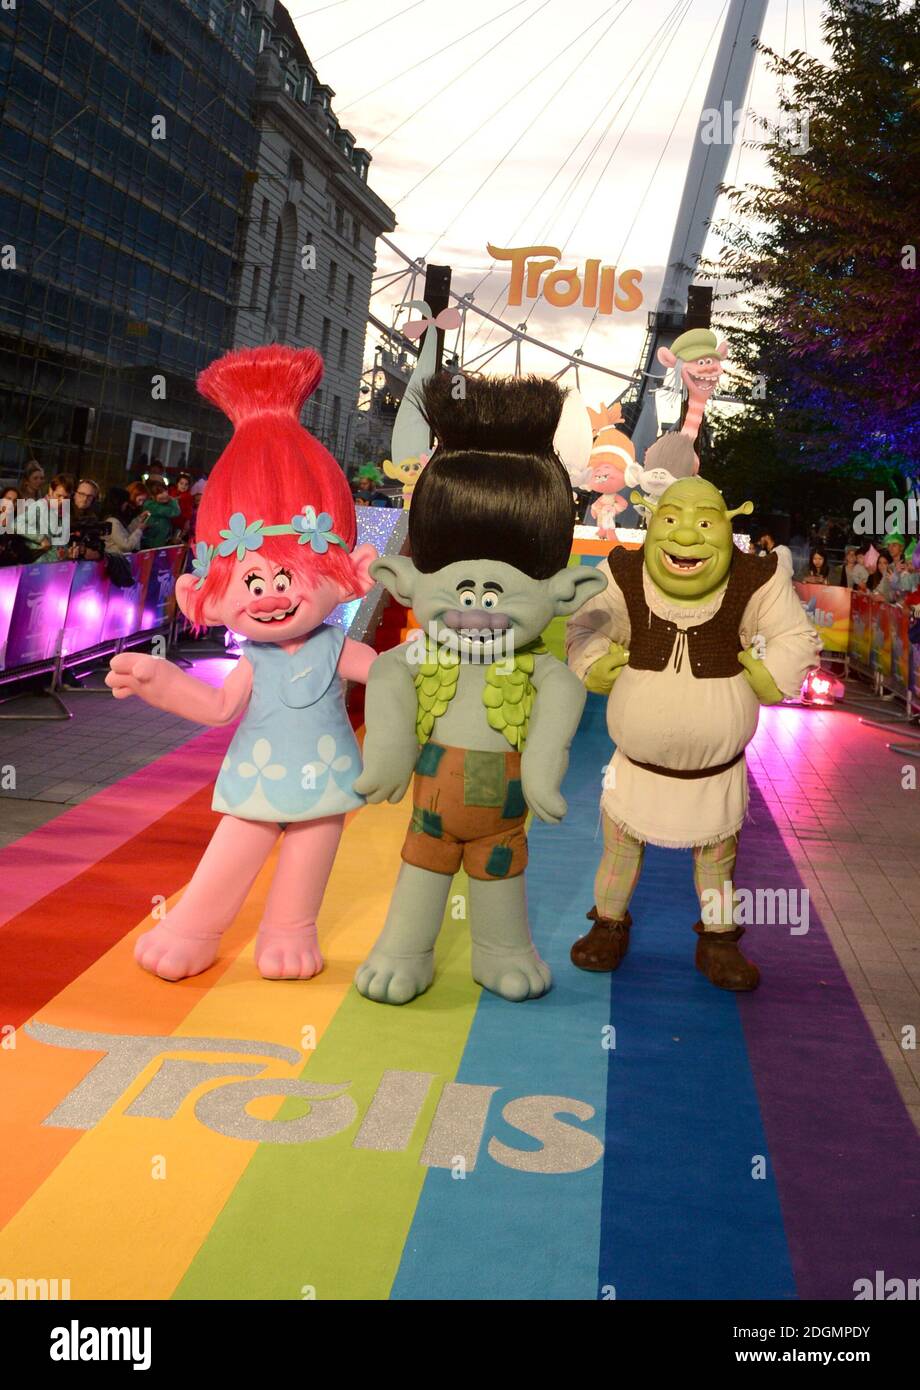 https://c8.alamy.com/comp/2DGMPDY/poppy-branch-and-shrek-attending-the-trolls-special-event-at-the-coca-cola-london-eye-on-the-river-thames-in-london-picture-date-thursday-september-28-2016-photo-credit-should-read-doug-peters-empics-entertainment-2DGMPDY.jpg